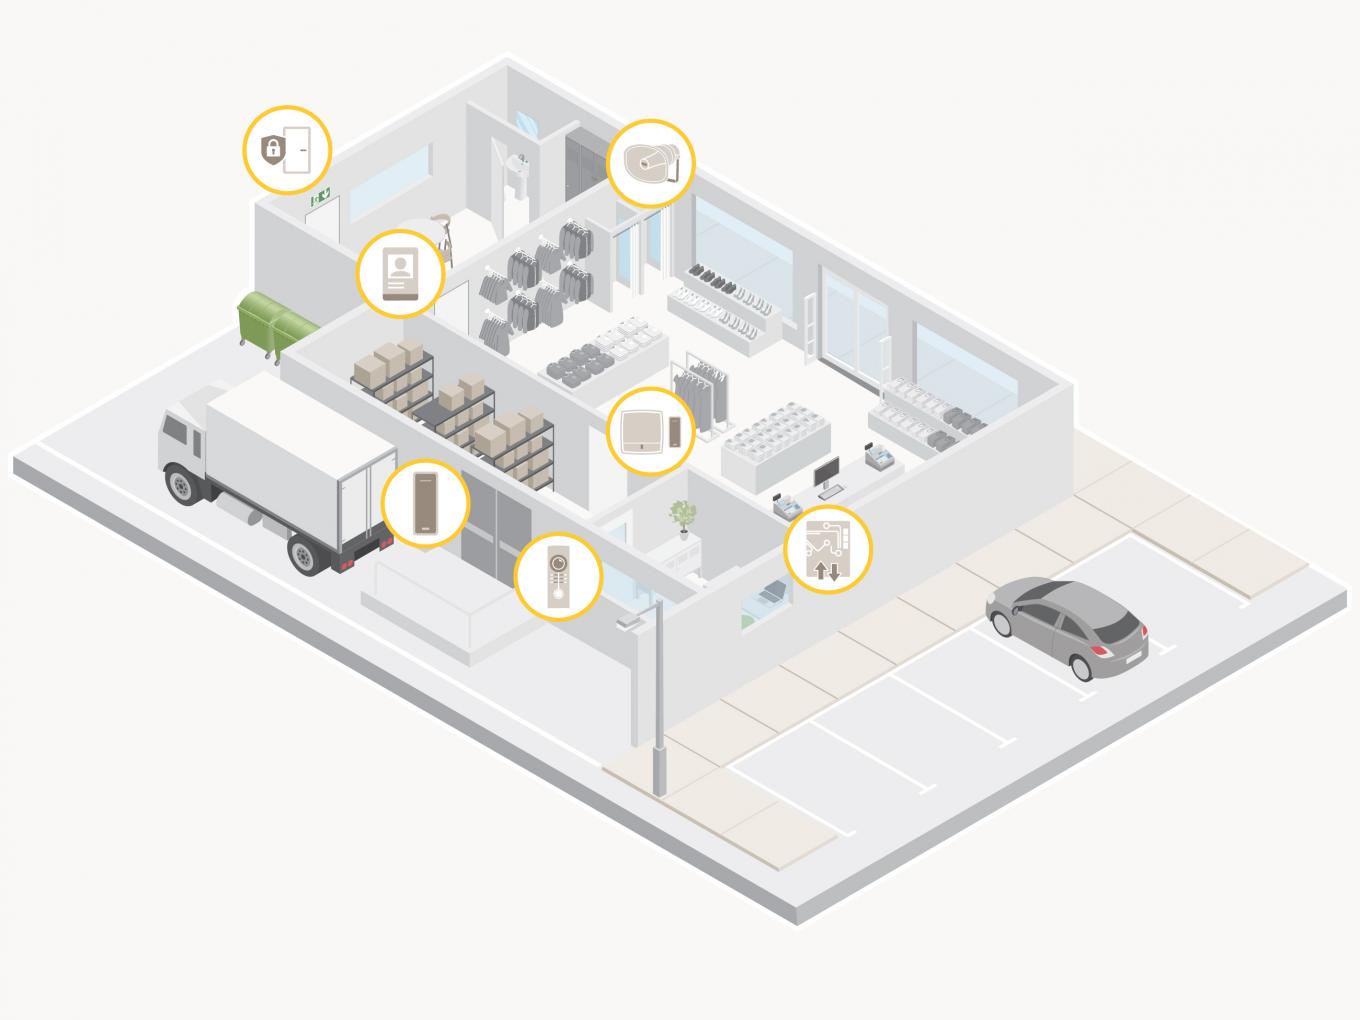 Illustration of access control in facility